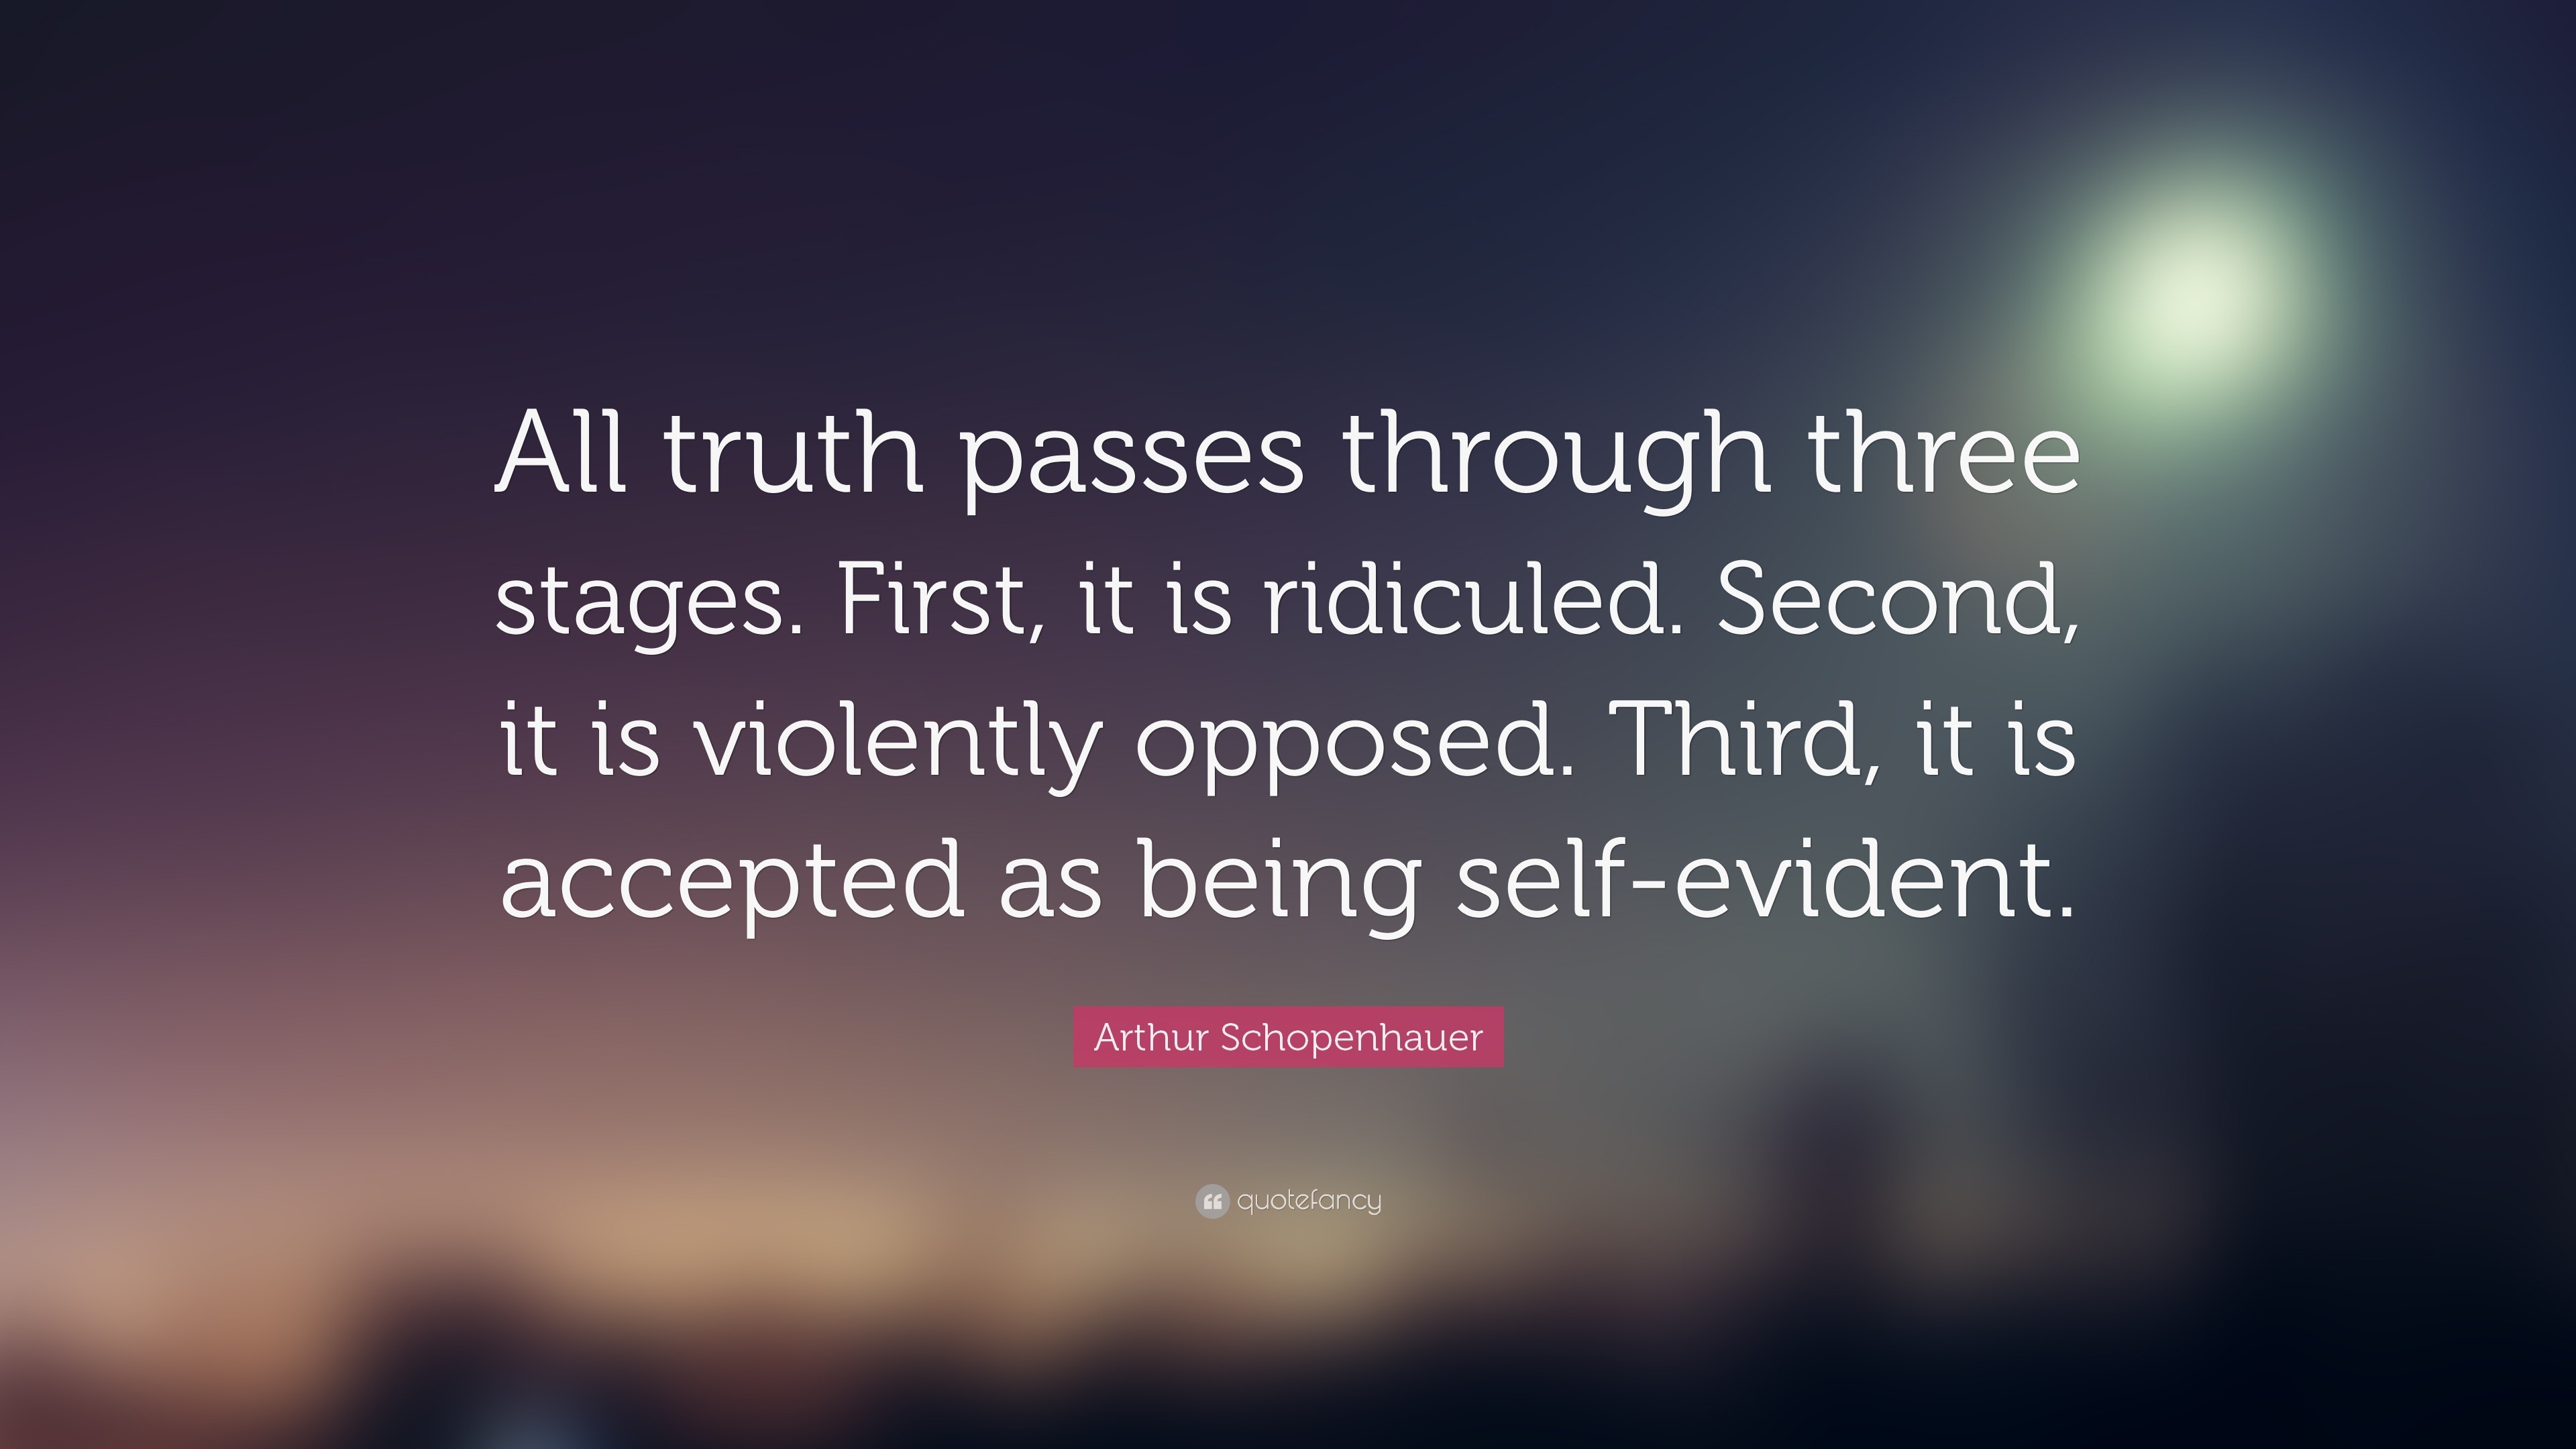 32419 Arthur Schopenhauer Quote All truth passes through three stages